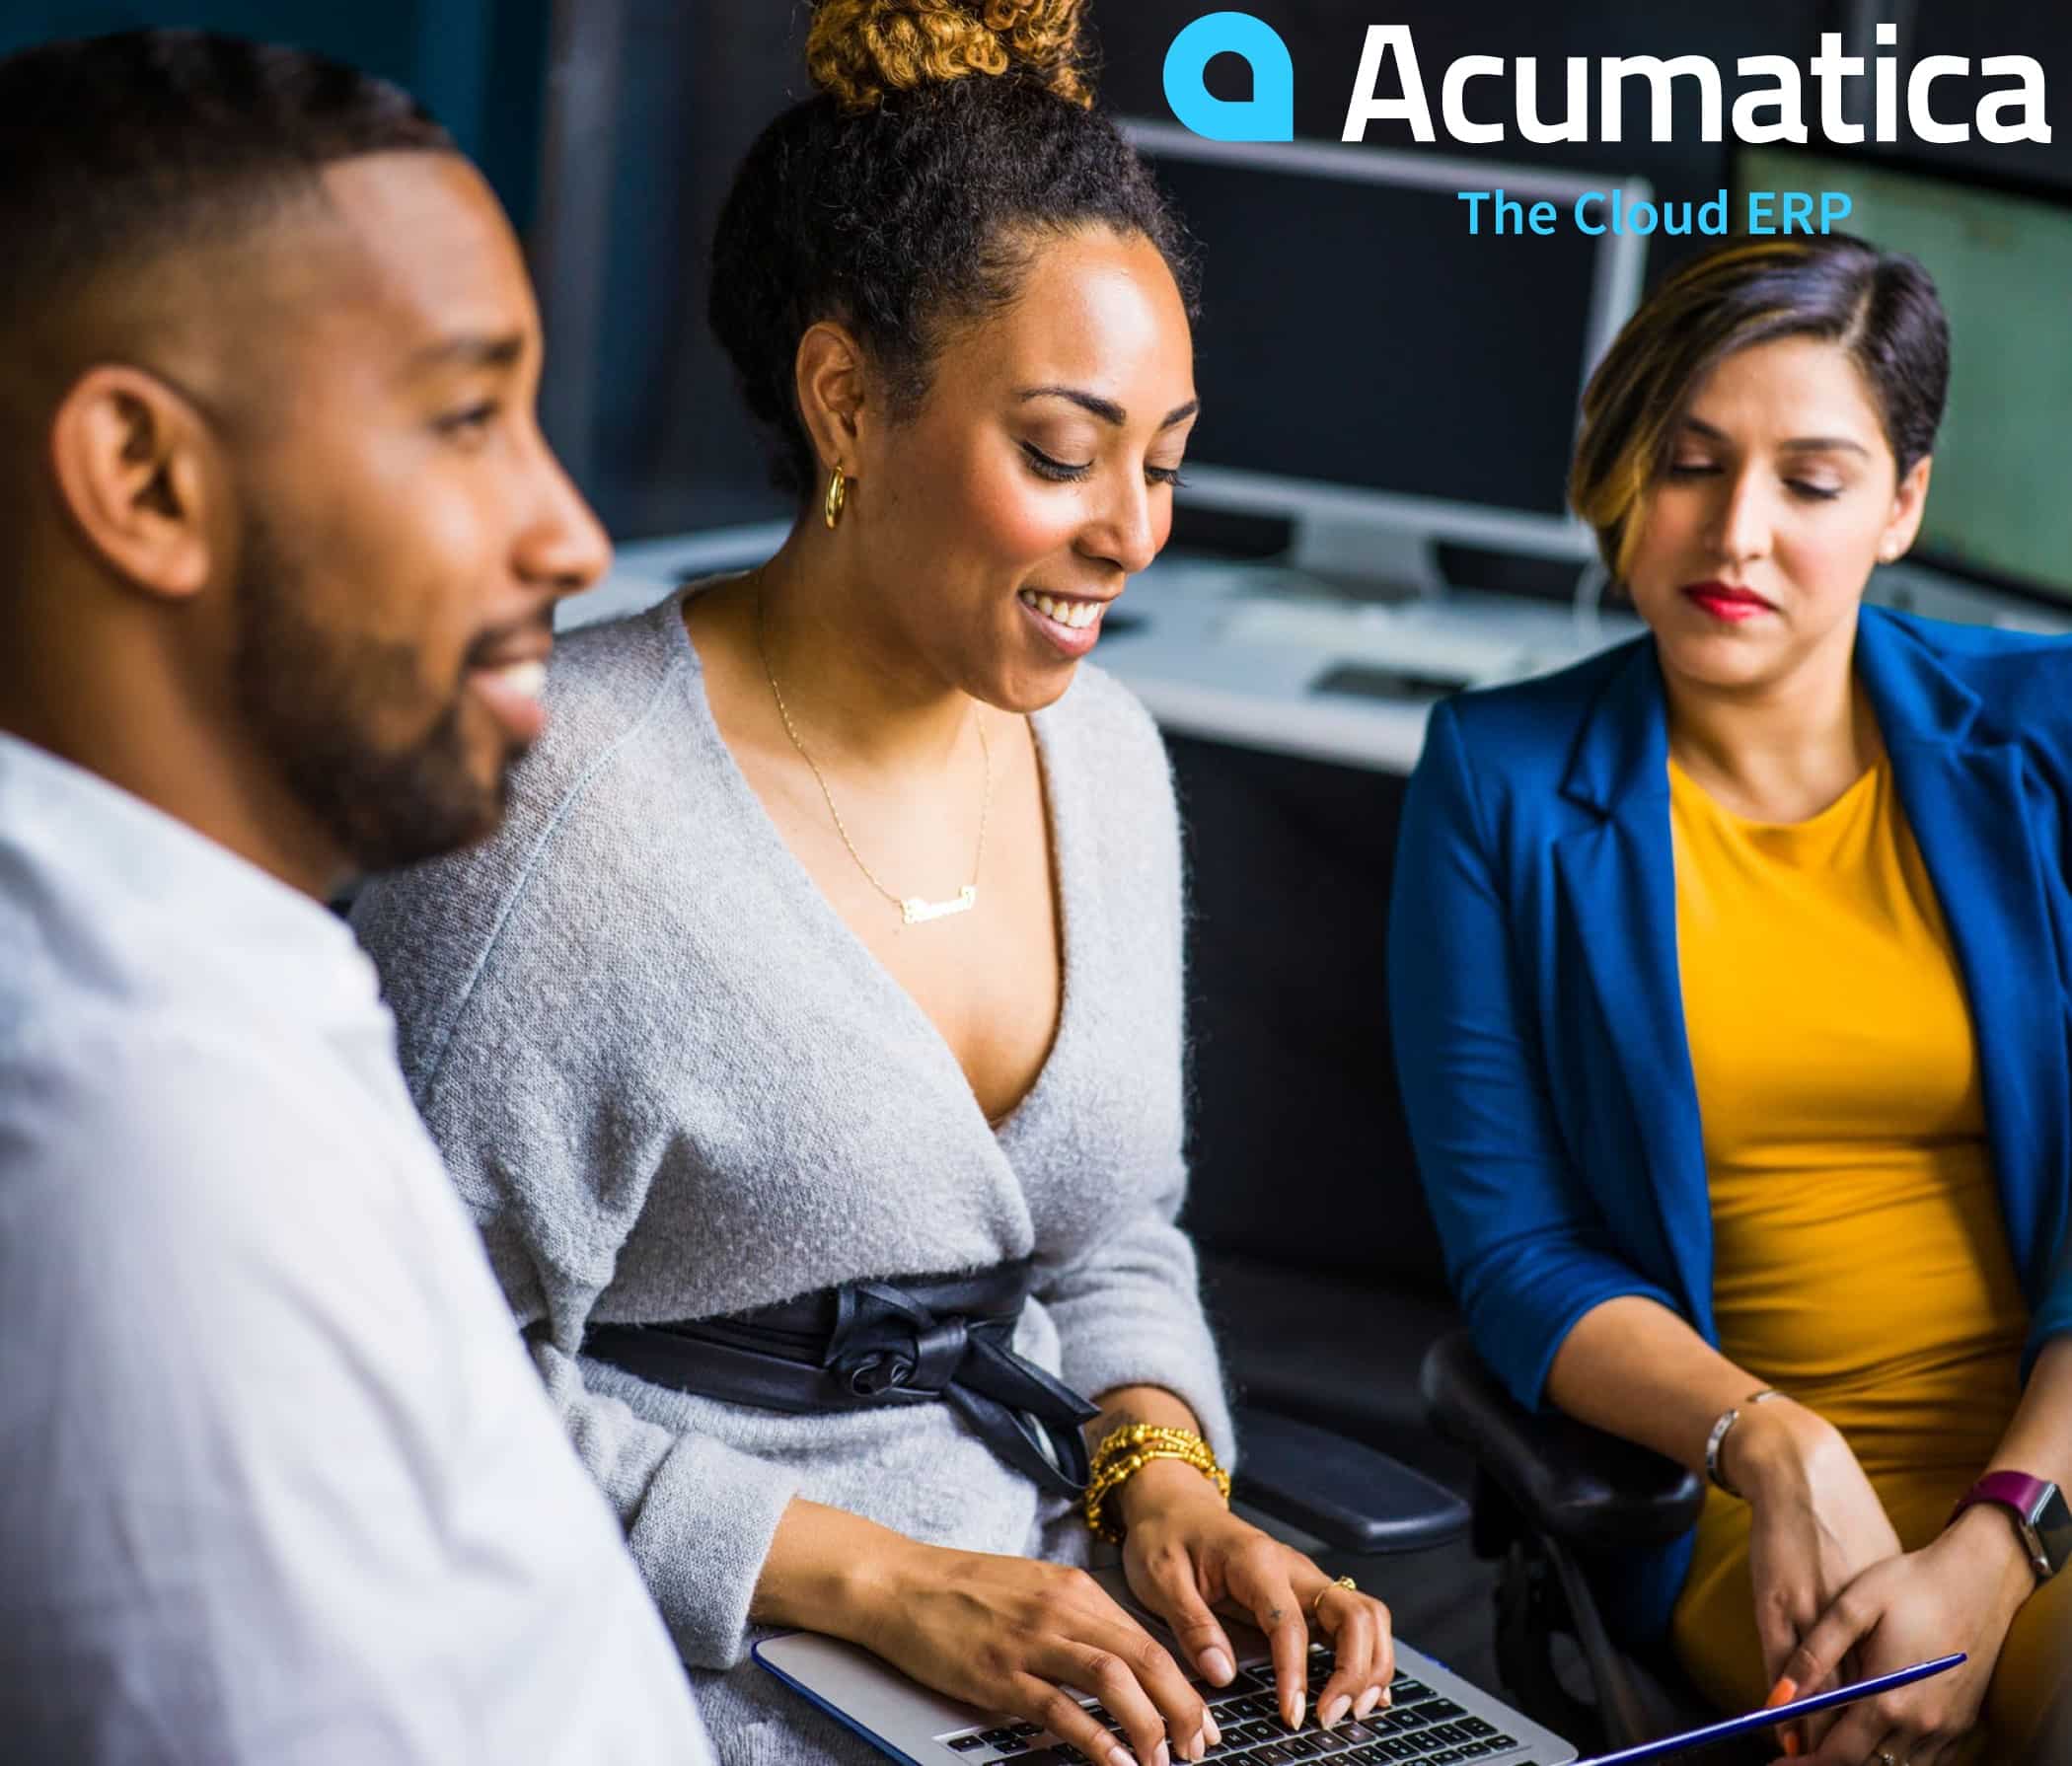 Contact SWK Technologies, the top-rated Acumatica Partner of 2018, to see Acumatica’s technology and features for yourself.